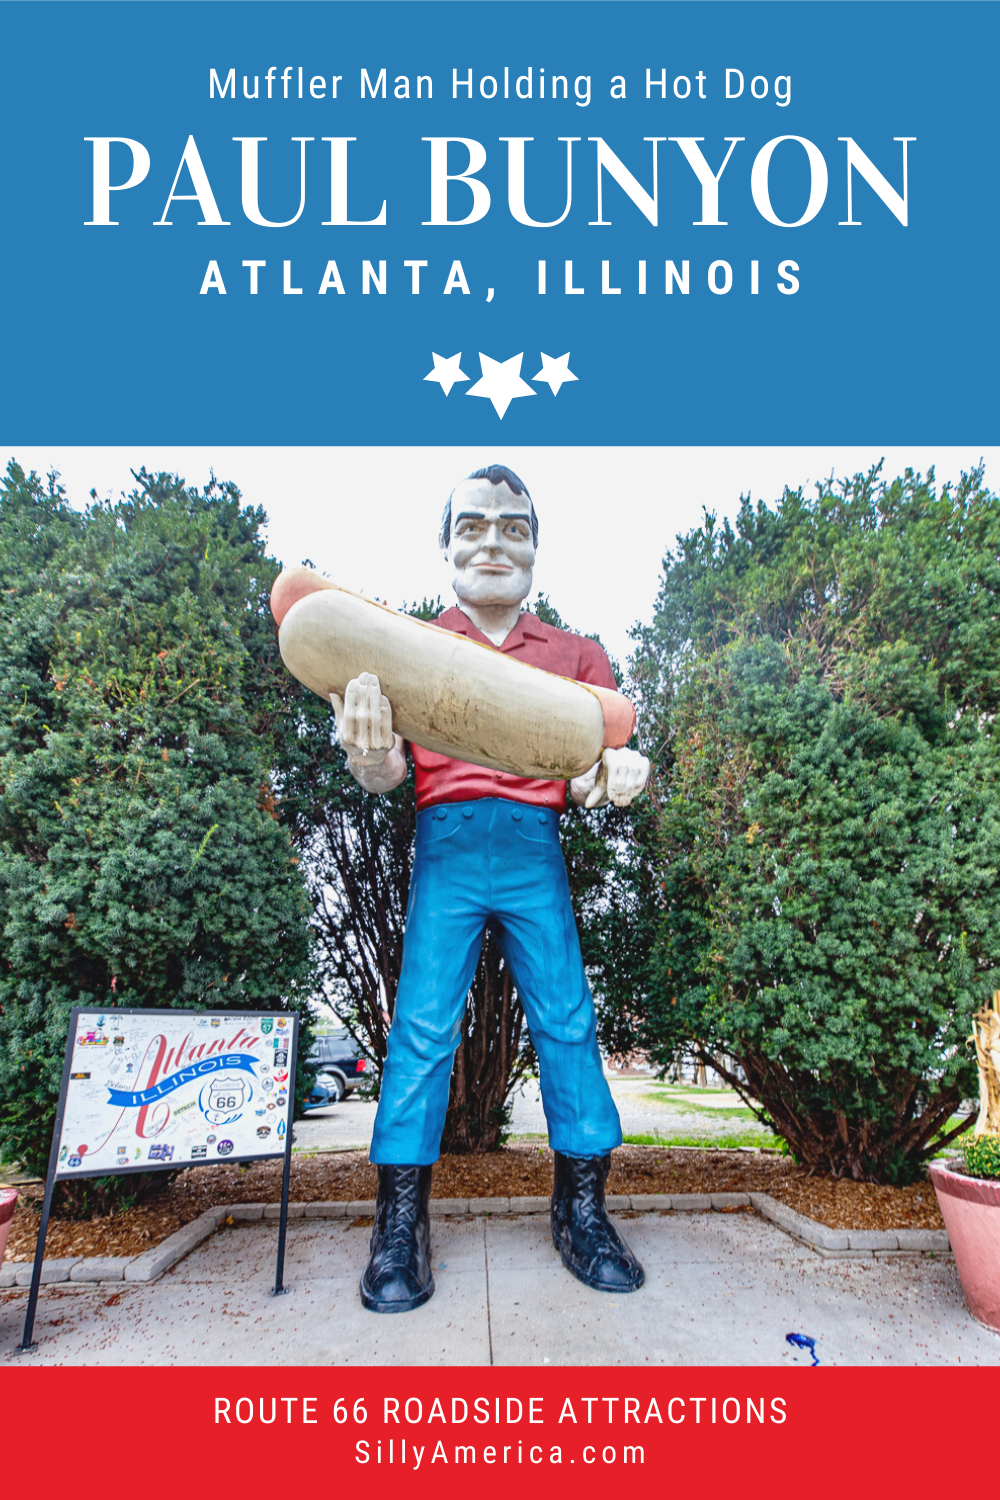 Photos of The Bunyon Giant - a 19-foot fiberglass Muffler Man holding a hot dog, a Paul Bunyan statue and Route 66 roadside attraction in Atlanta, Illinois. Visit this weird roadside attraction on an Illinois road trip and add it to your travel bucket list for your Route 66 adventure this summer.  #RoadTrips #RoadTripStop #Route66 #Route66RoadTrip #IllinoisRoute66 #Illinois #IllinoisRoadTrip #IllinoisRoadsideAttractions #RoadsideAttractions #RoadsideAttraction #RoadsideAmerica #RoadTrip